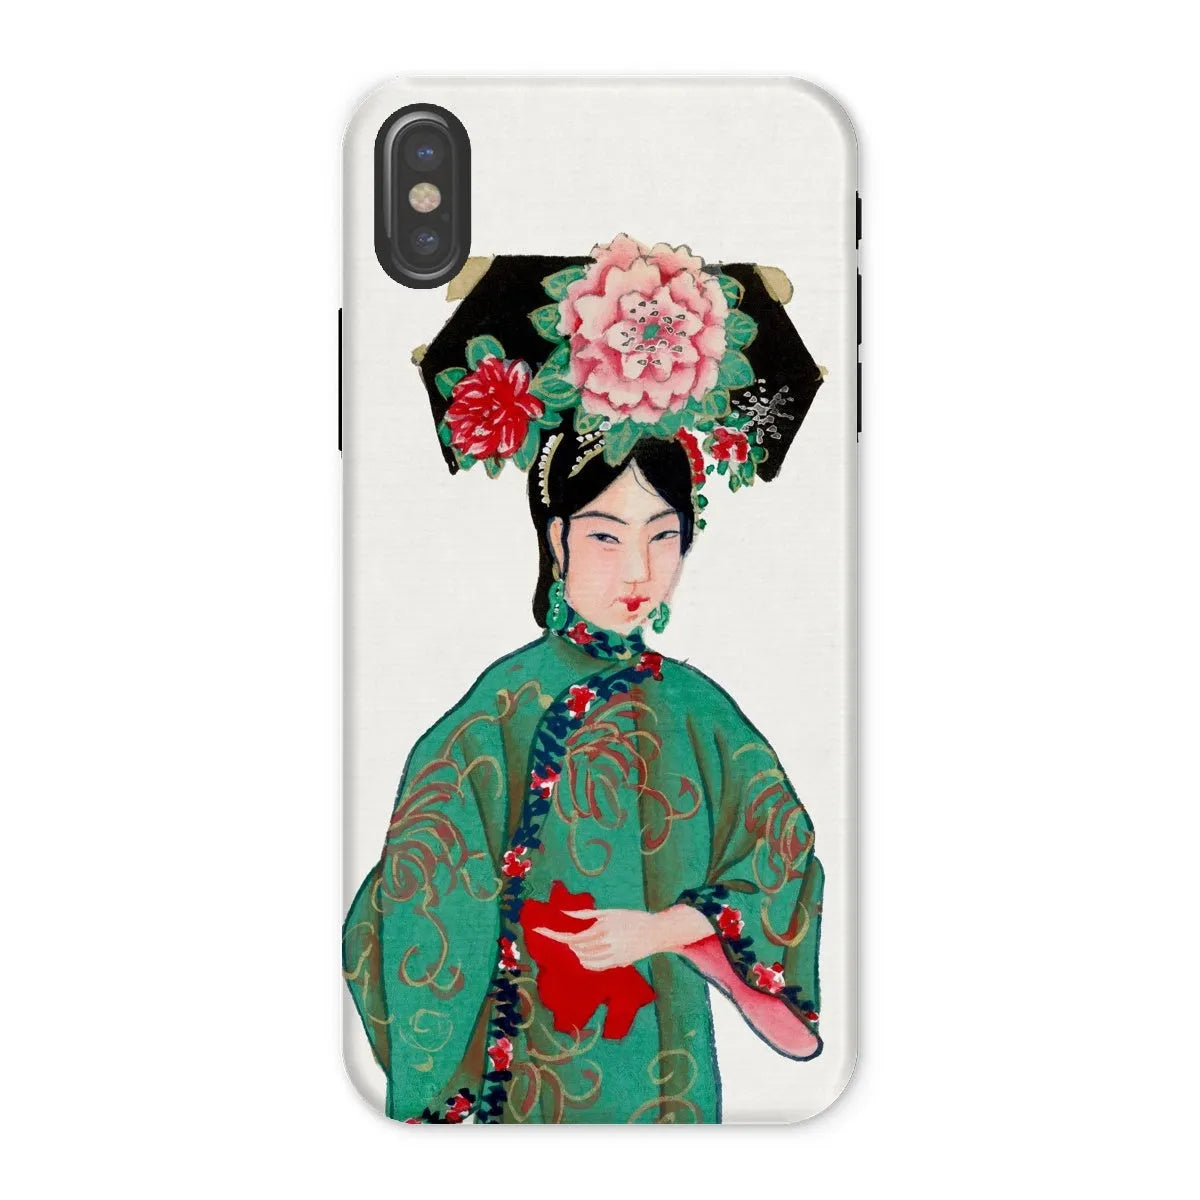 Chinese Noblewoman In Manchu Couture Art Phone Case - Iphone x / Matte - Mobile Phone Cases - Aesthetic Art